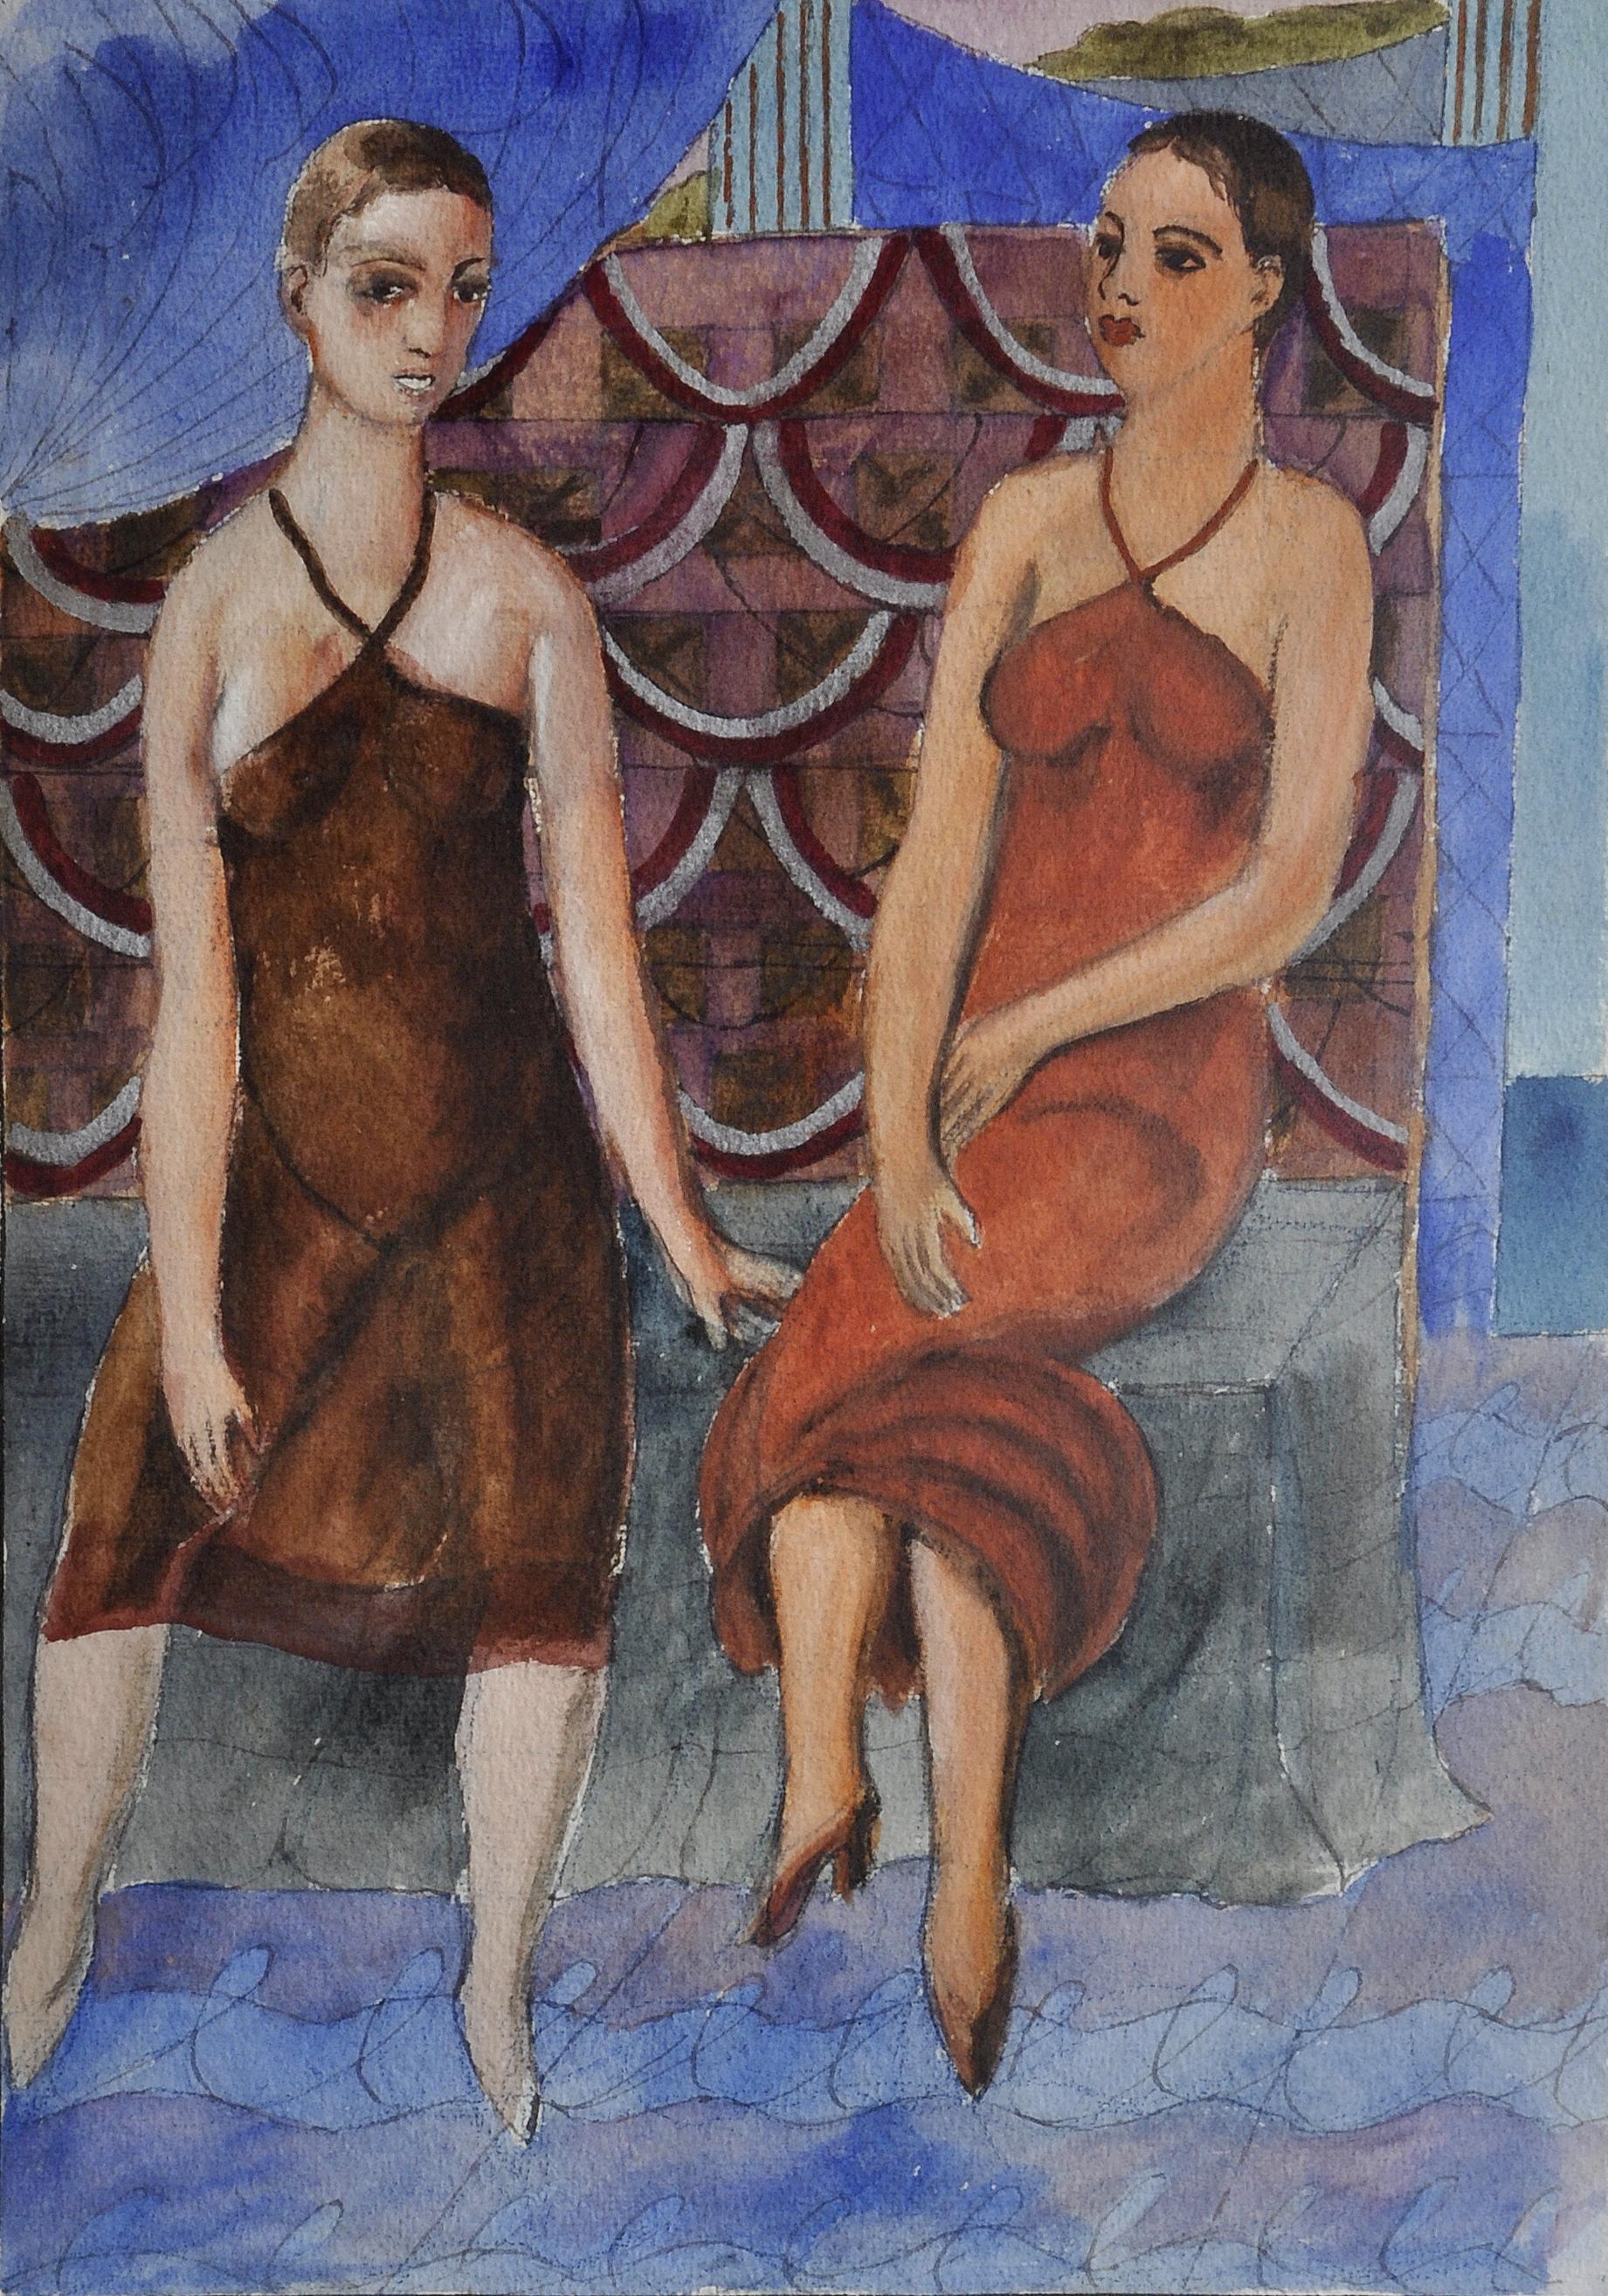 Adolfs Zardins Figurative Painting - Lady in red and lady in brown. 1935. Paper, watercolor, 35x25 cm